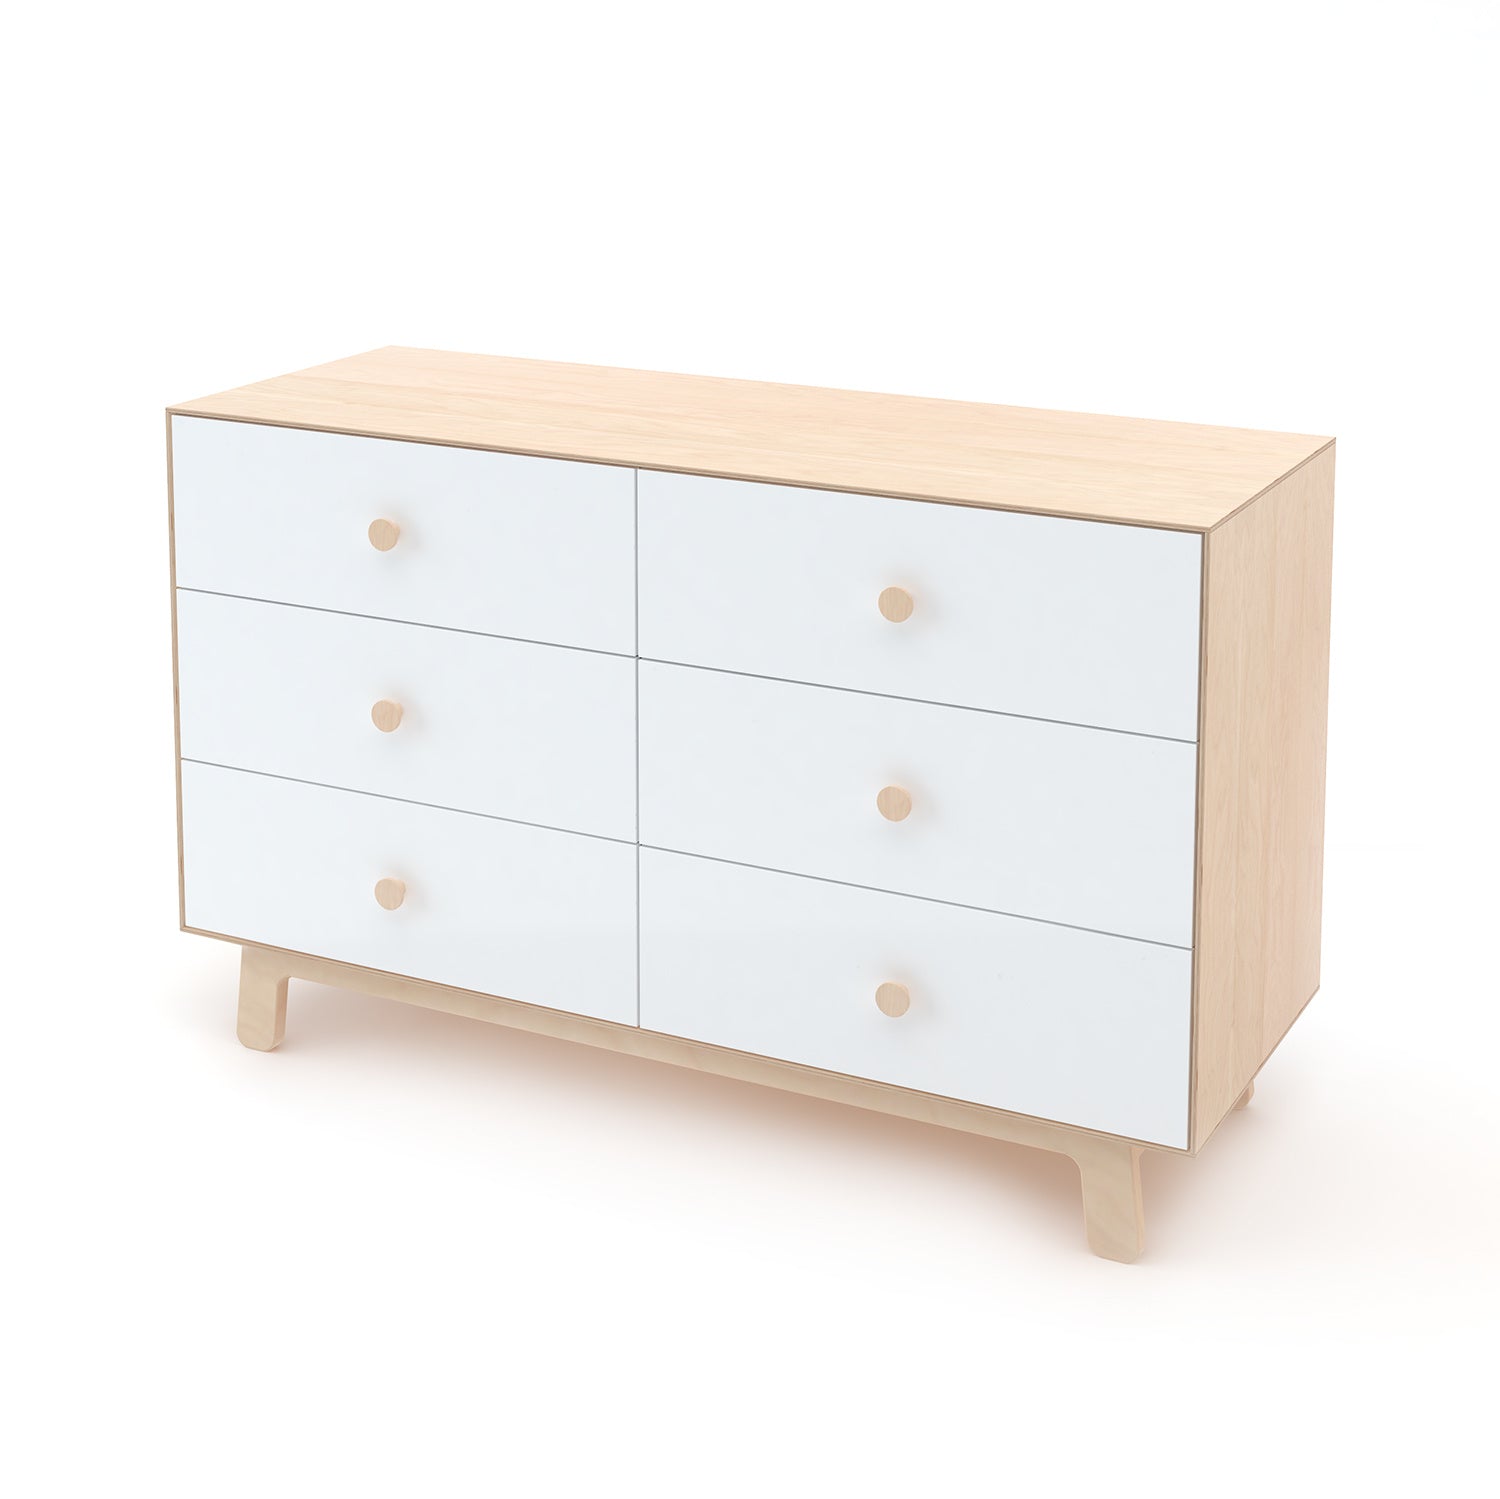 Sparrow Chest of 6 Drawers, White and Birch